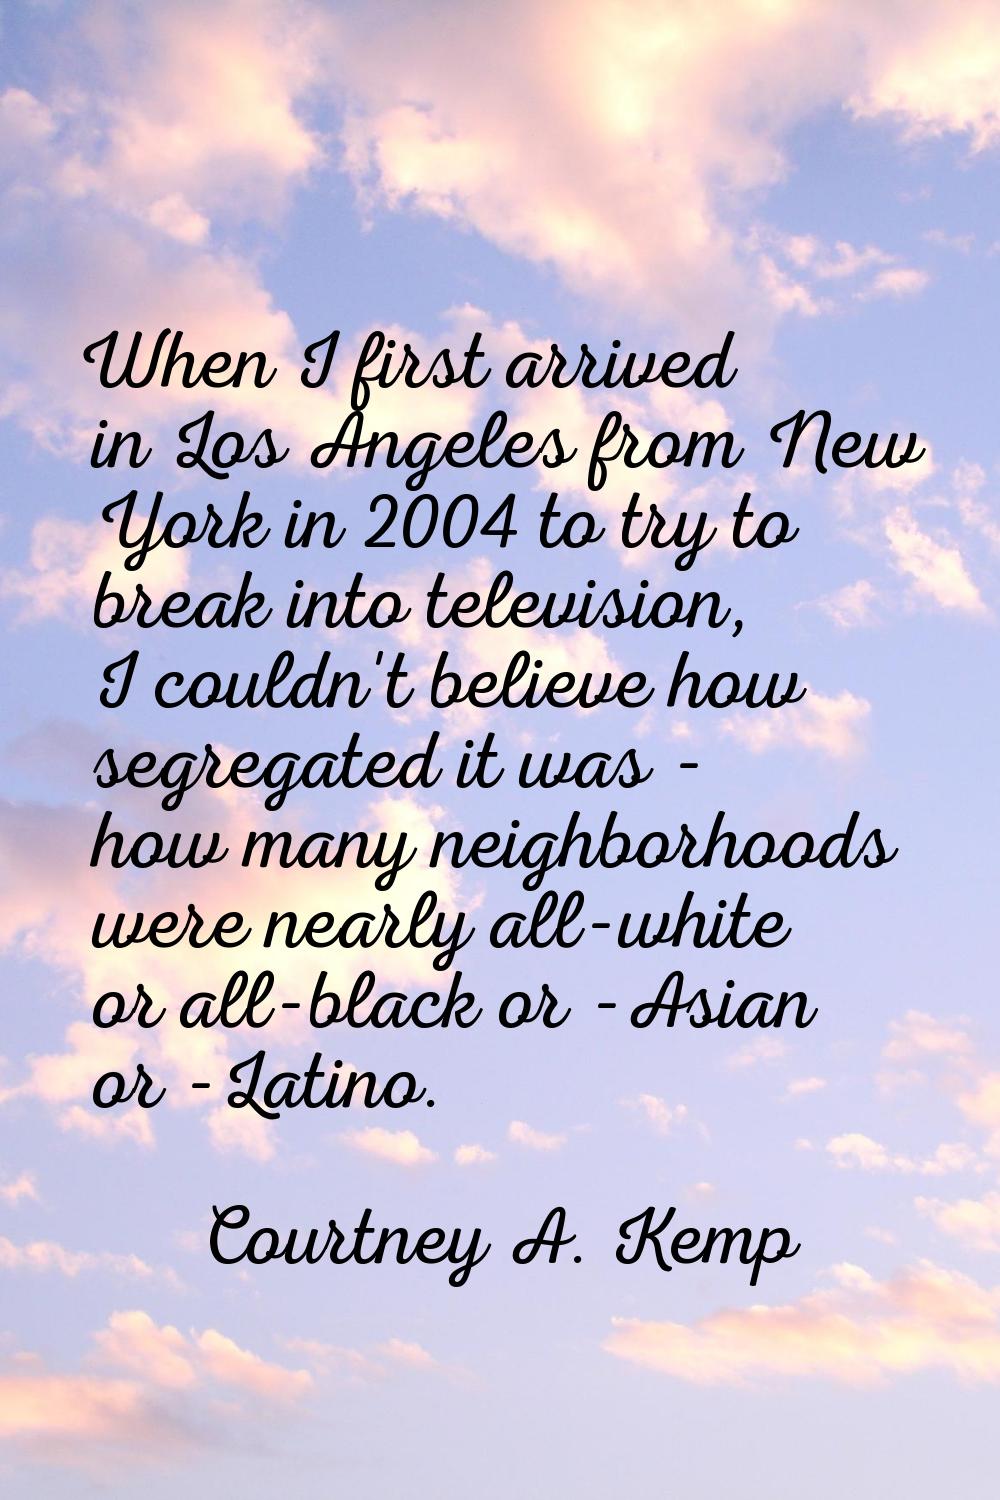 When I first arrived in Los Angeles from New York in 2004 to try to break into television, I couldn